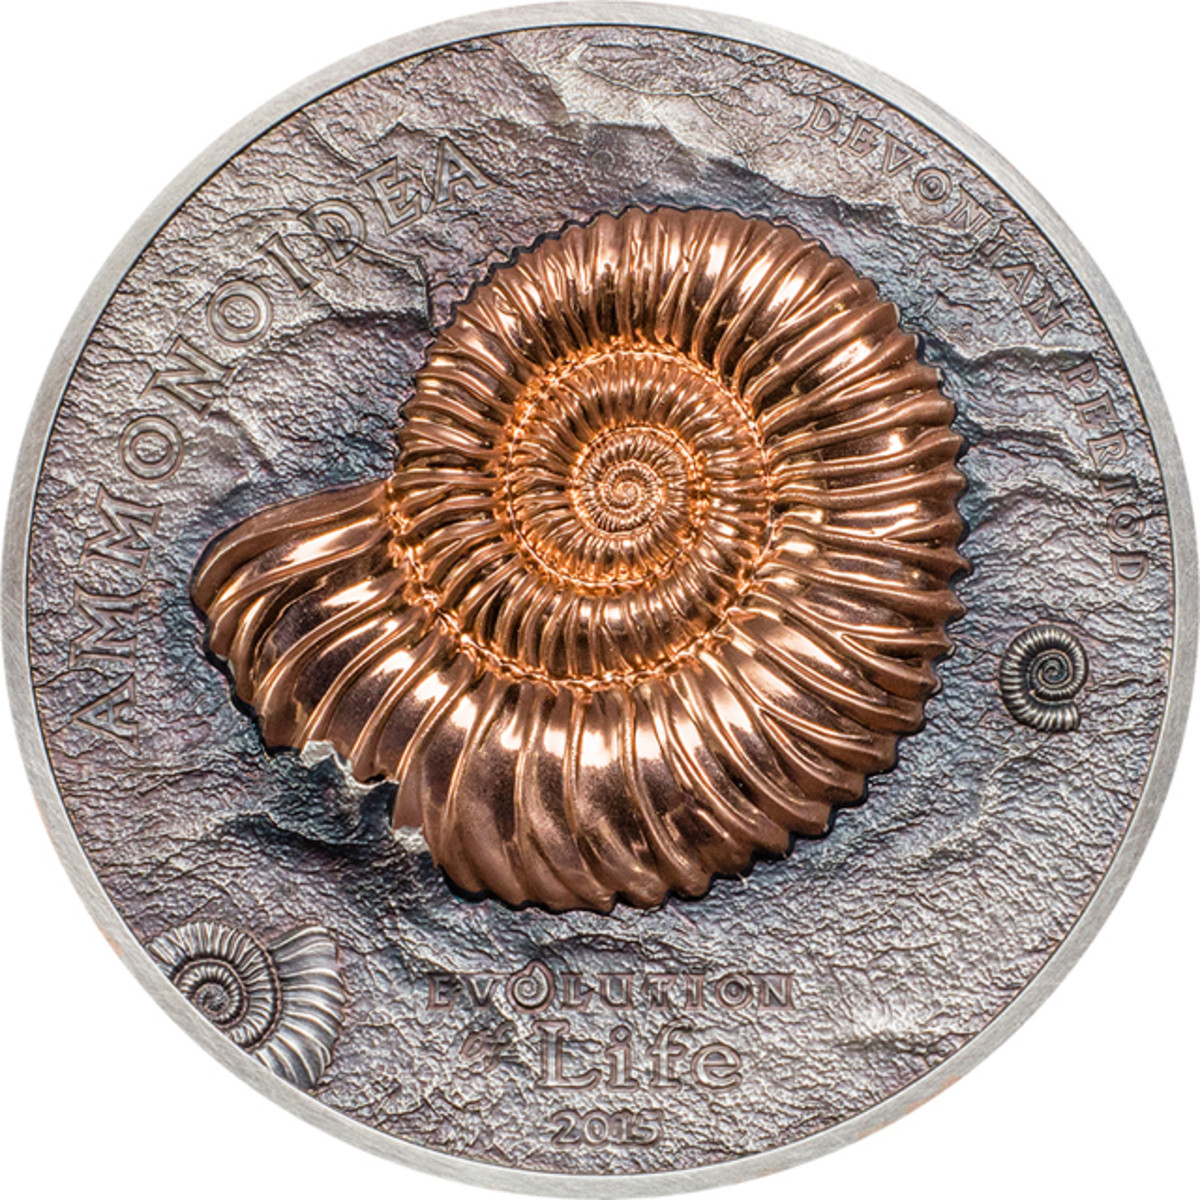 The silver coin of Mongolia’s new Evolution of Life series celebrate amazing ammonites in high-relief. The silver has an antiqued finish. Images courtesy Coin Invest Trust.